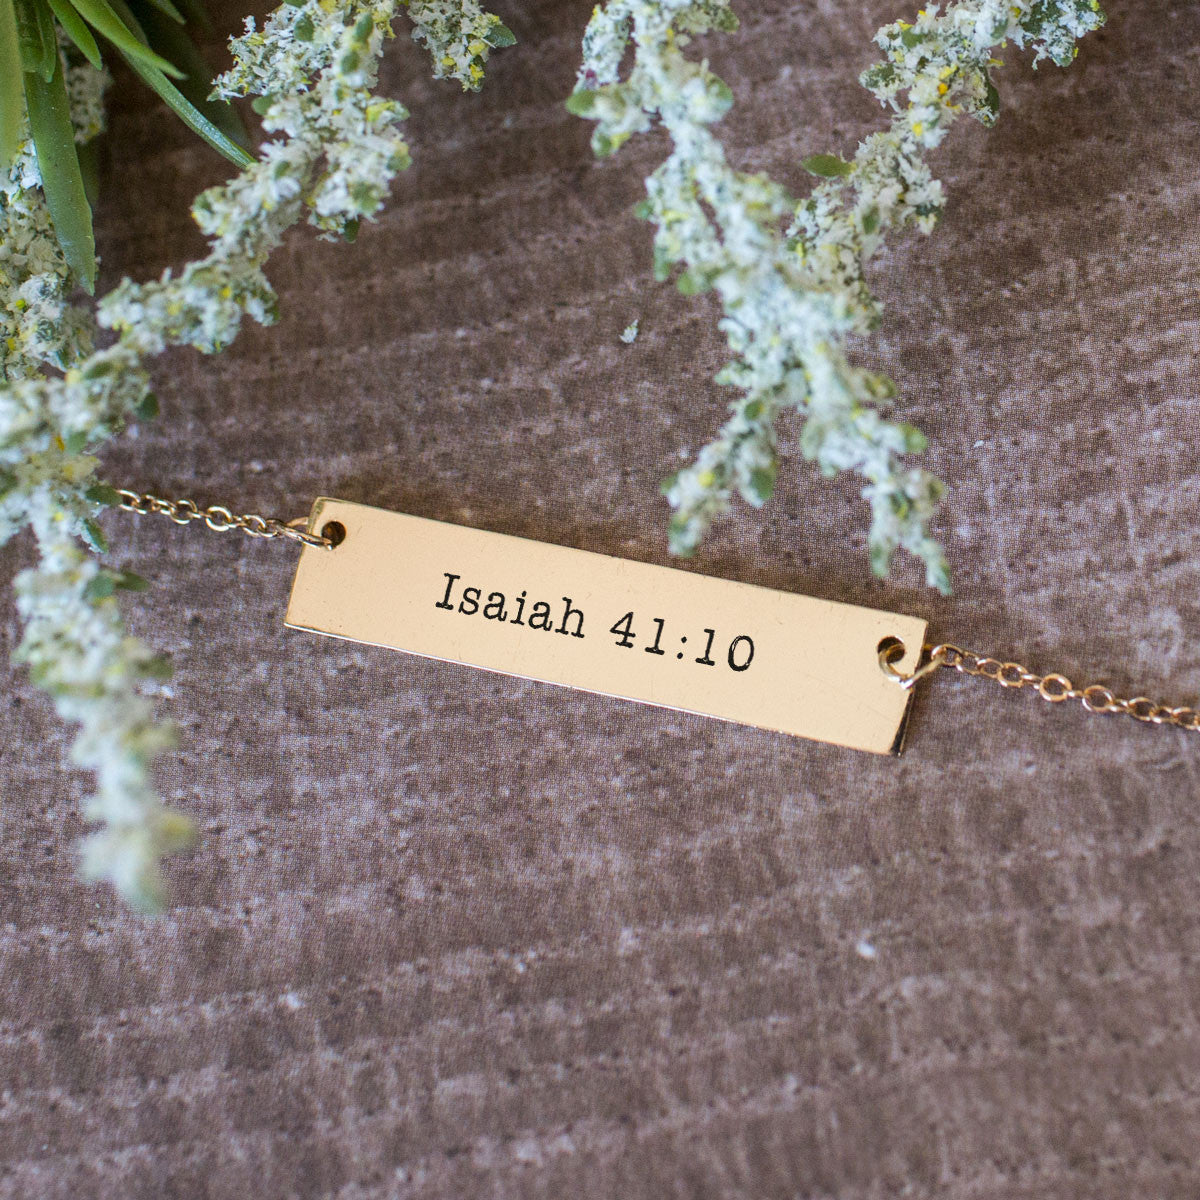 Isaiah 41:10 Gold / Silver Bar Necklace